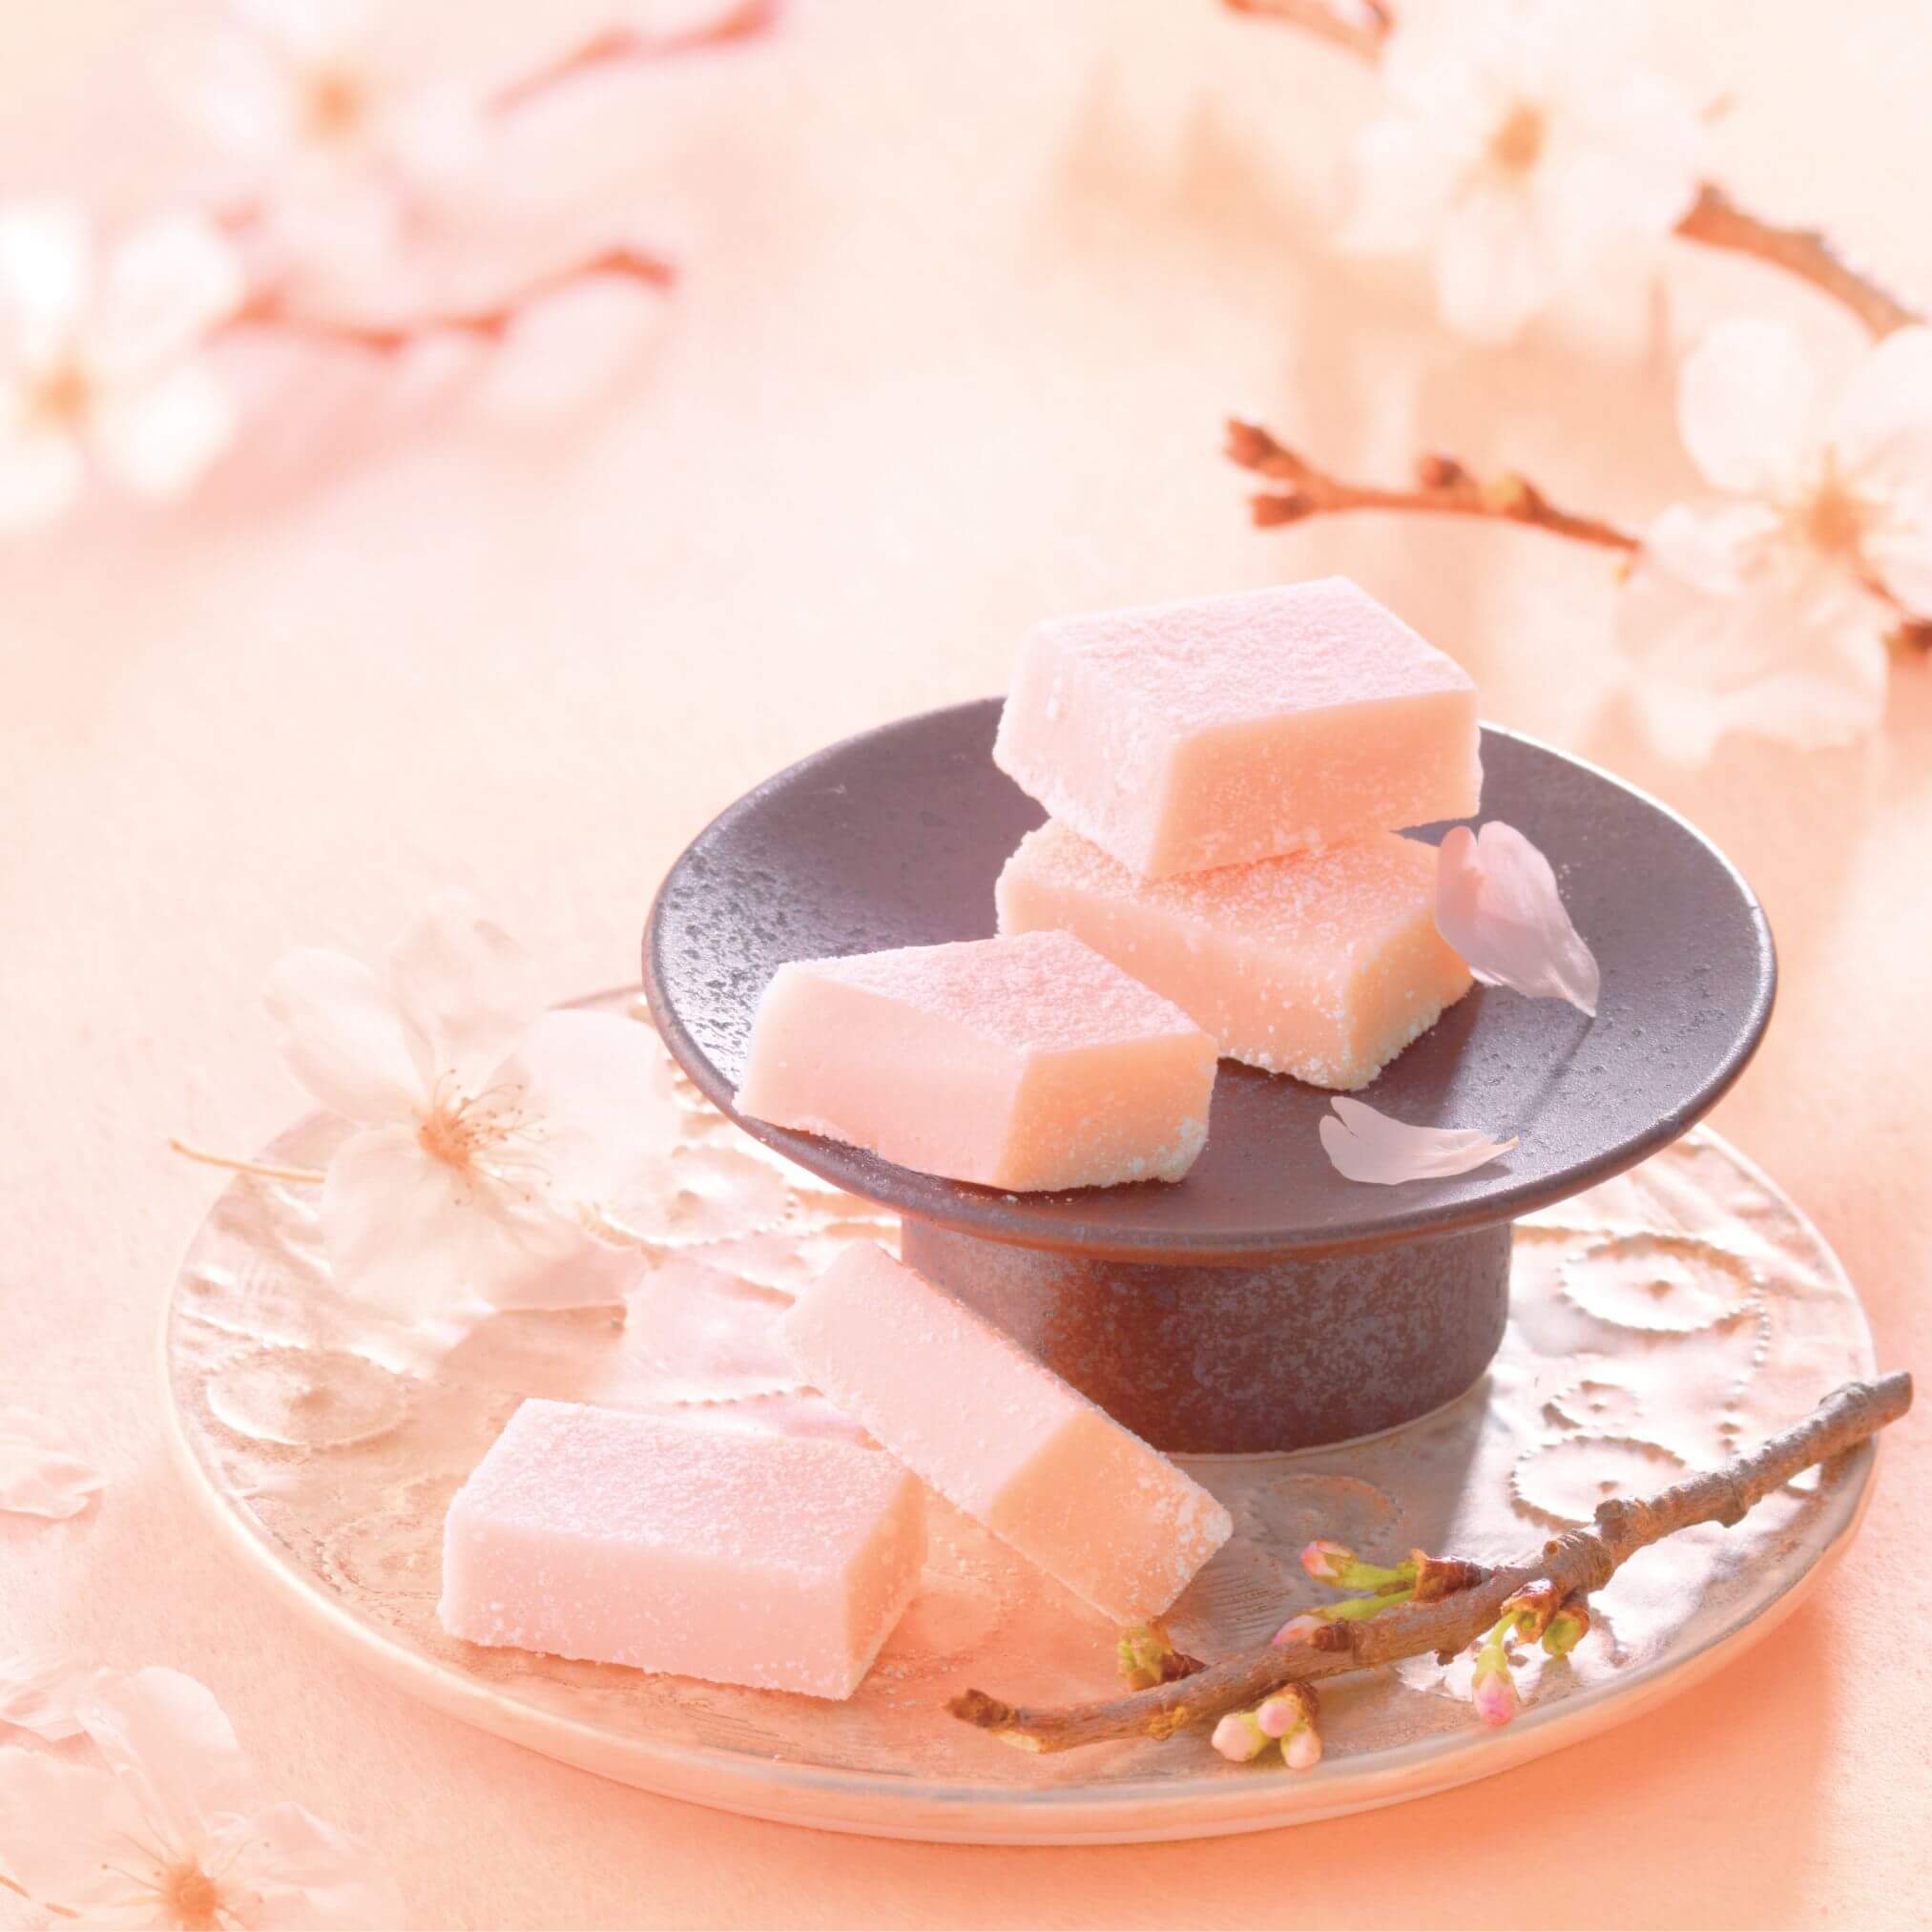 ROYCE' Chocolate - Nama Chocolate "Sakura Fromage" - Image shows pink blocks of chocolates on white and gray plates, with accents of white flowers and twigs. Background is in pink.